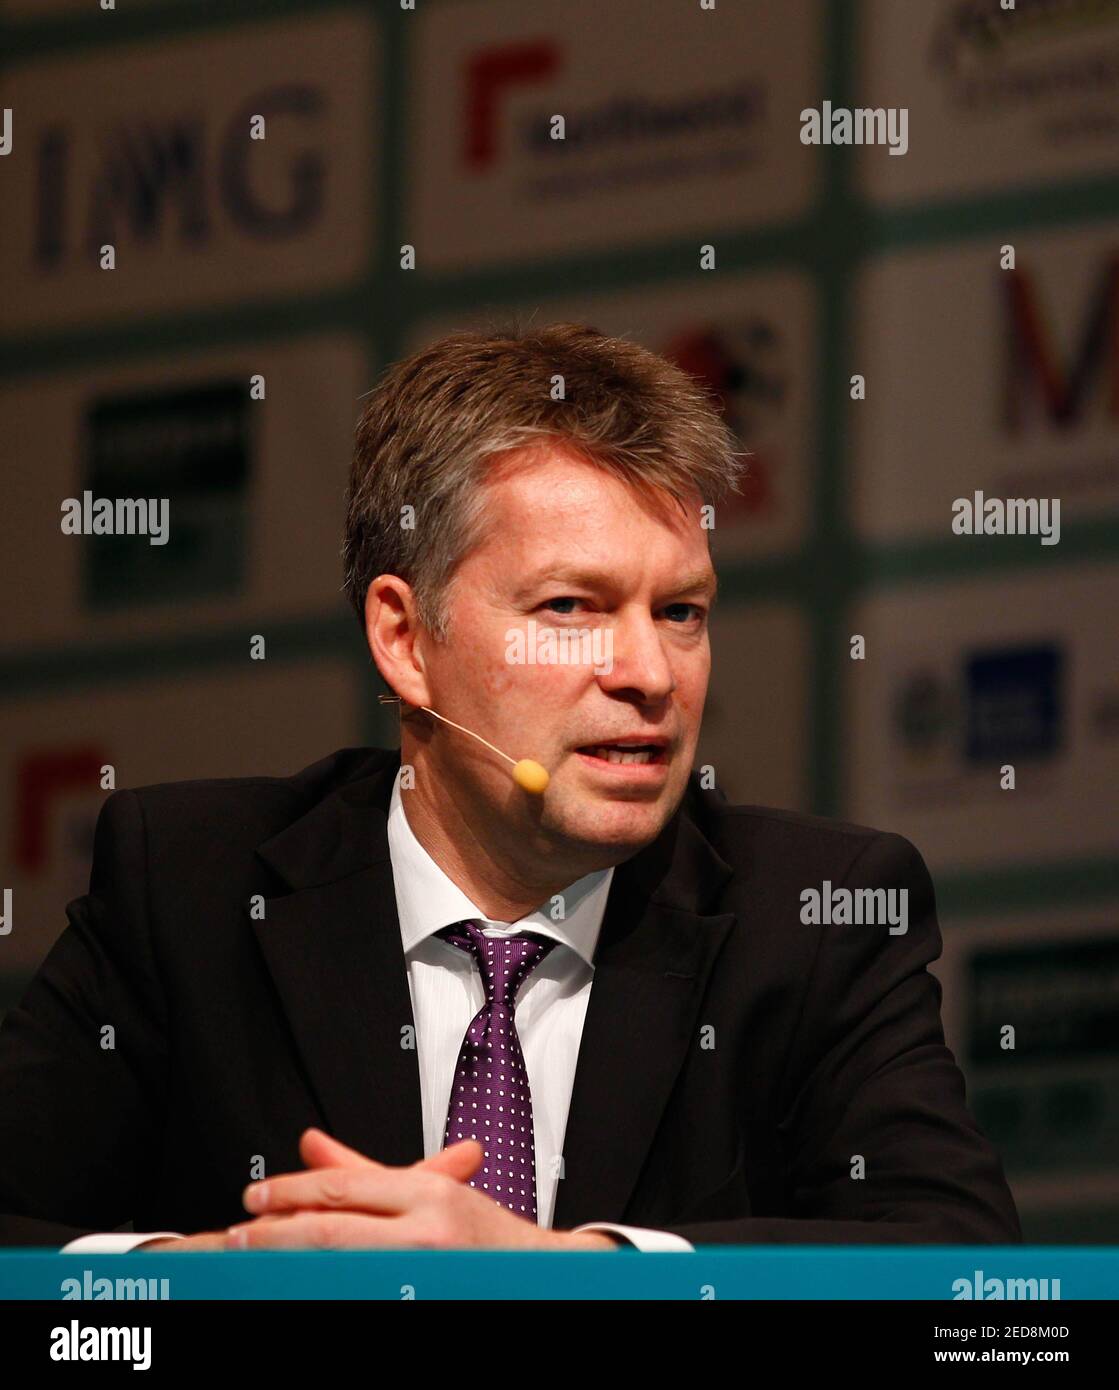 Football - Soccerex 2012 - Manchester - 28/3/12  DFB Marketing Director Denni Strich speaks during the UEFA Centralisation of Media Rights conference  Mandatory Credit: Action Images / Jason Cairnduff  Livepic Stock Photo